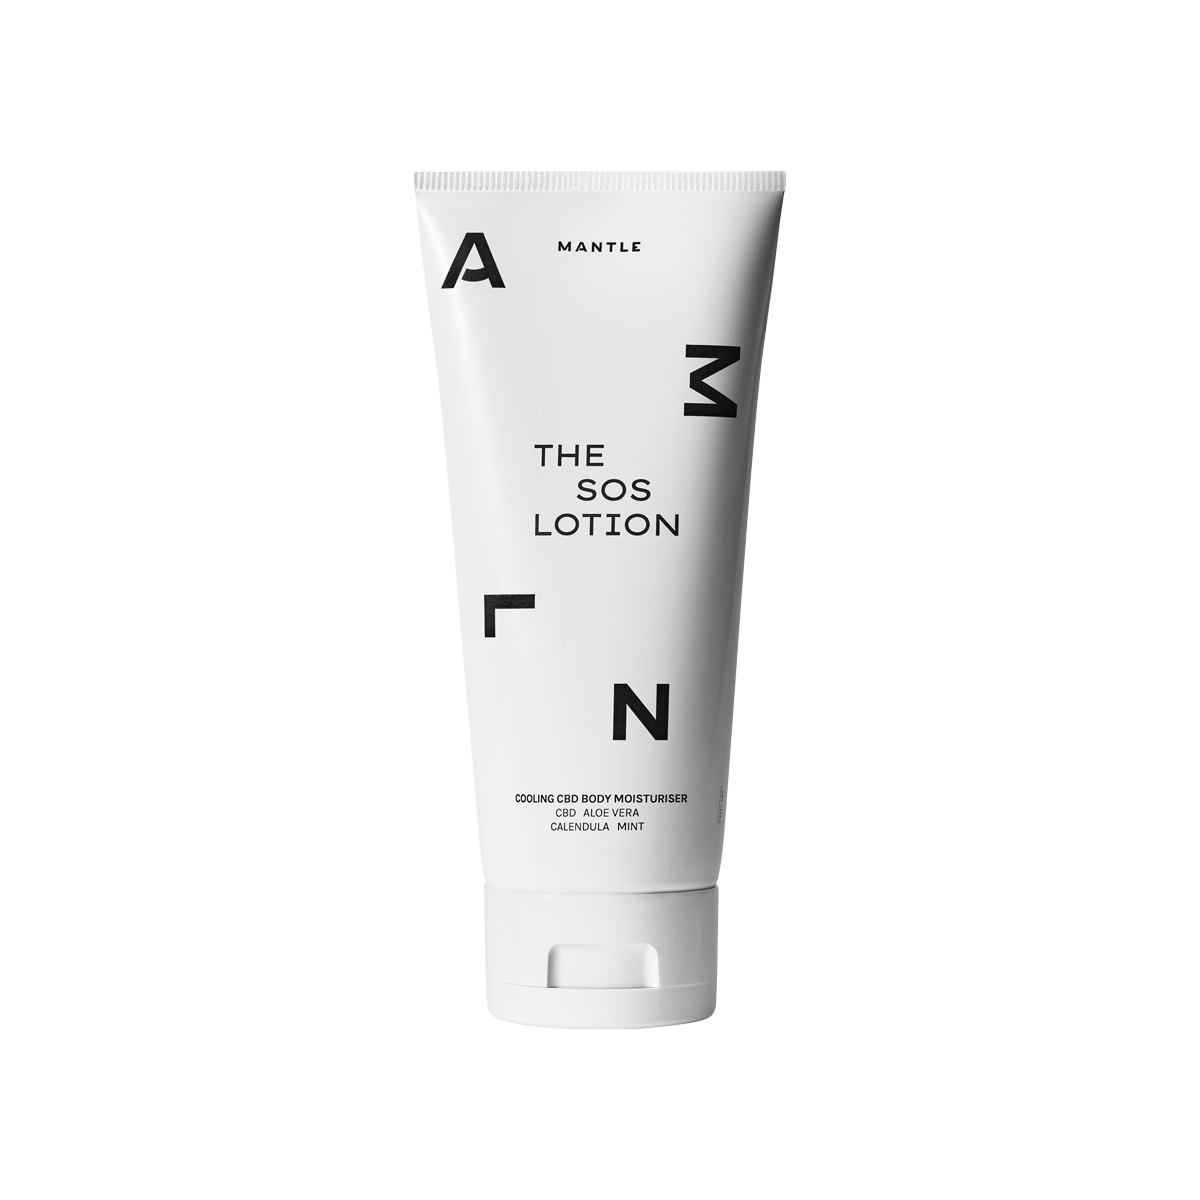 MANTLE - The SOS Lotion